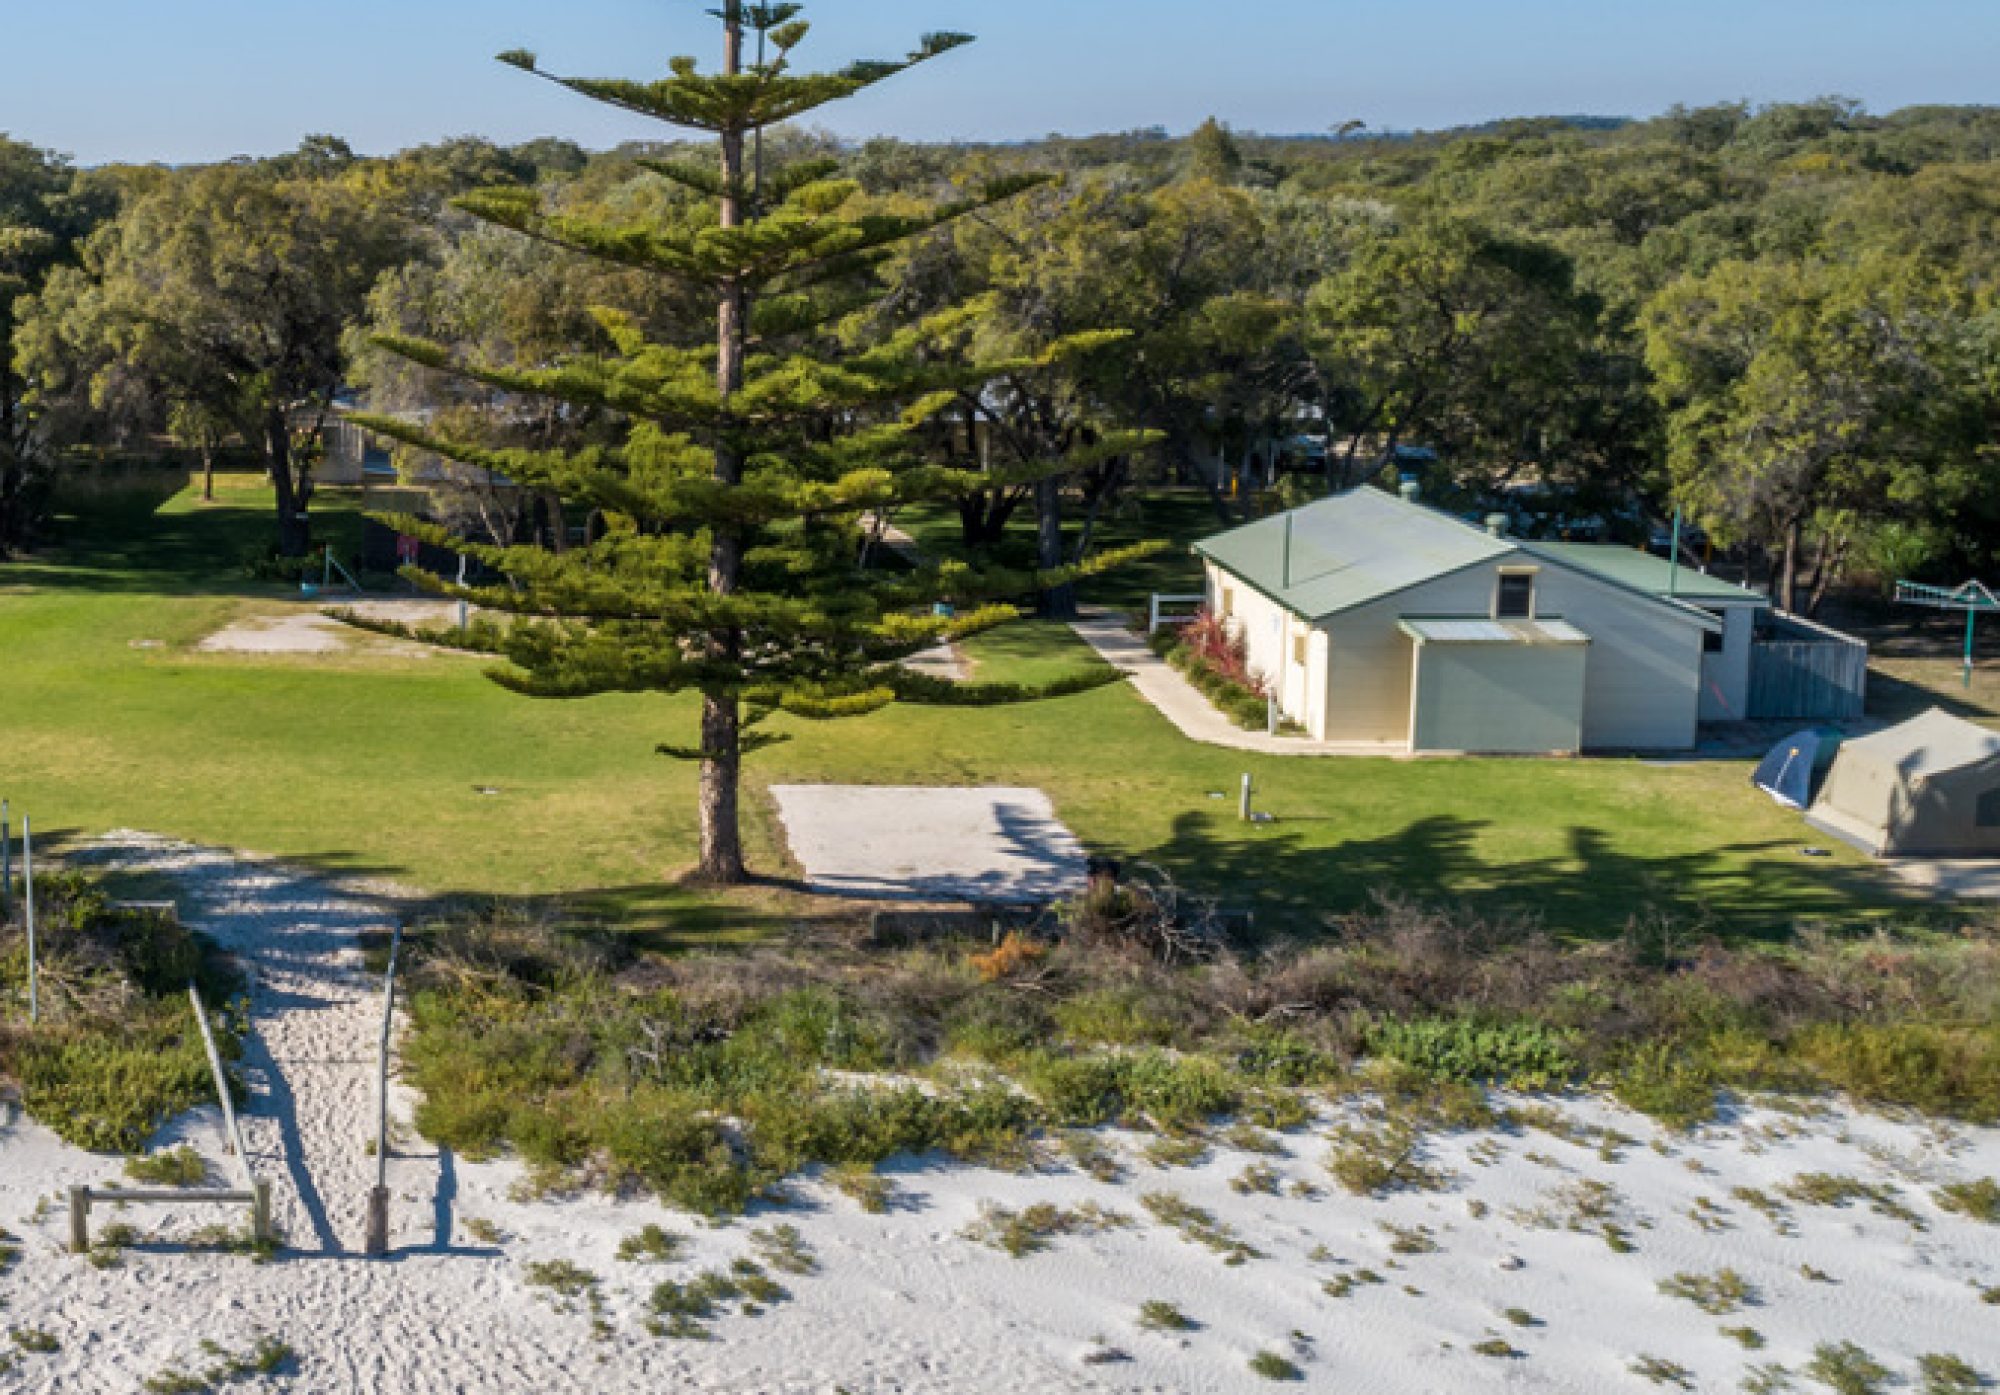 Busselton Youth Camp Ground